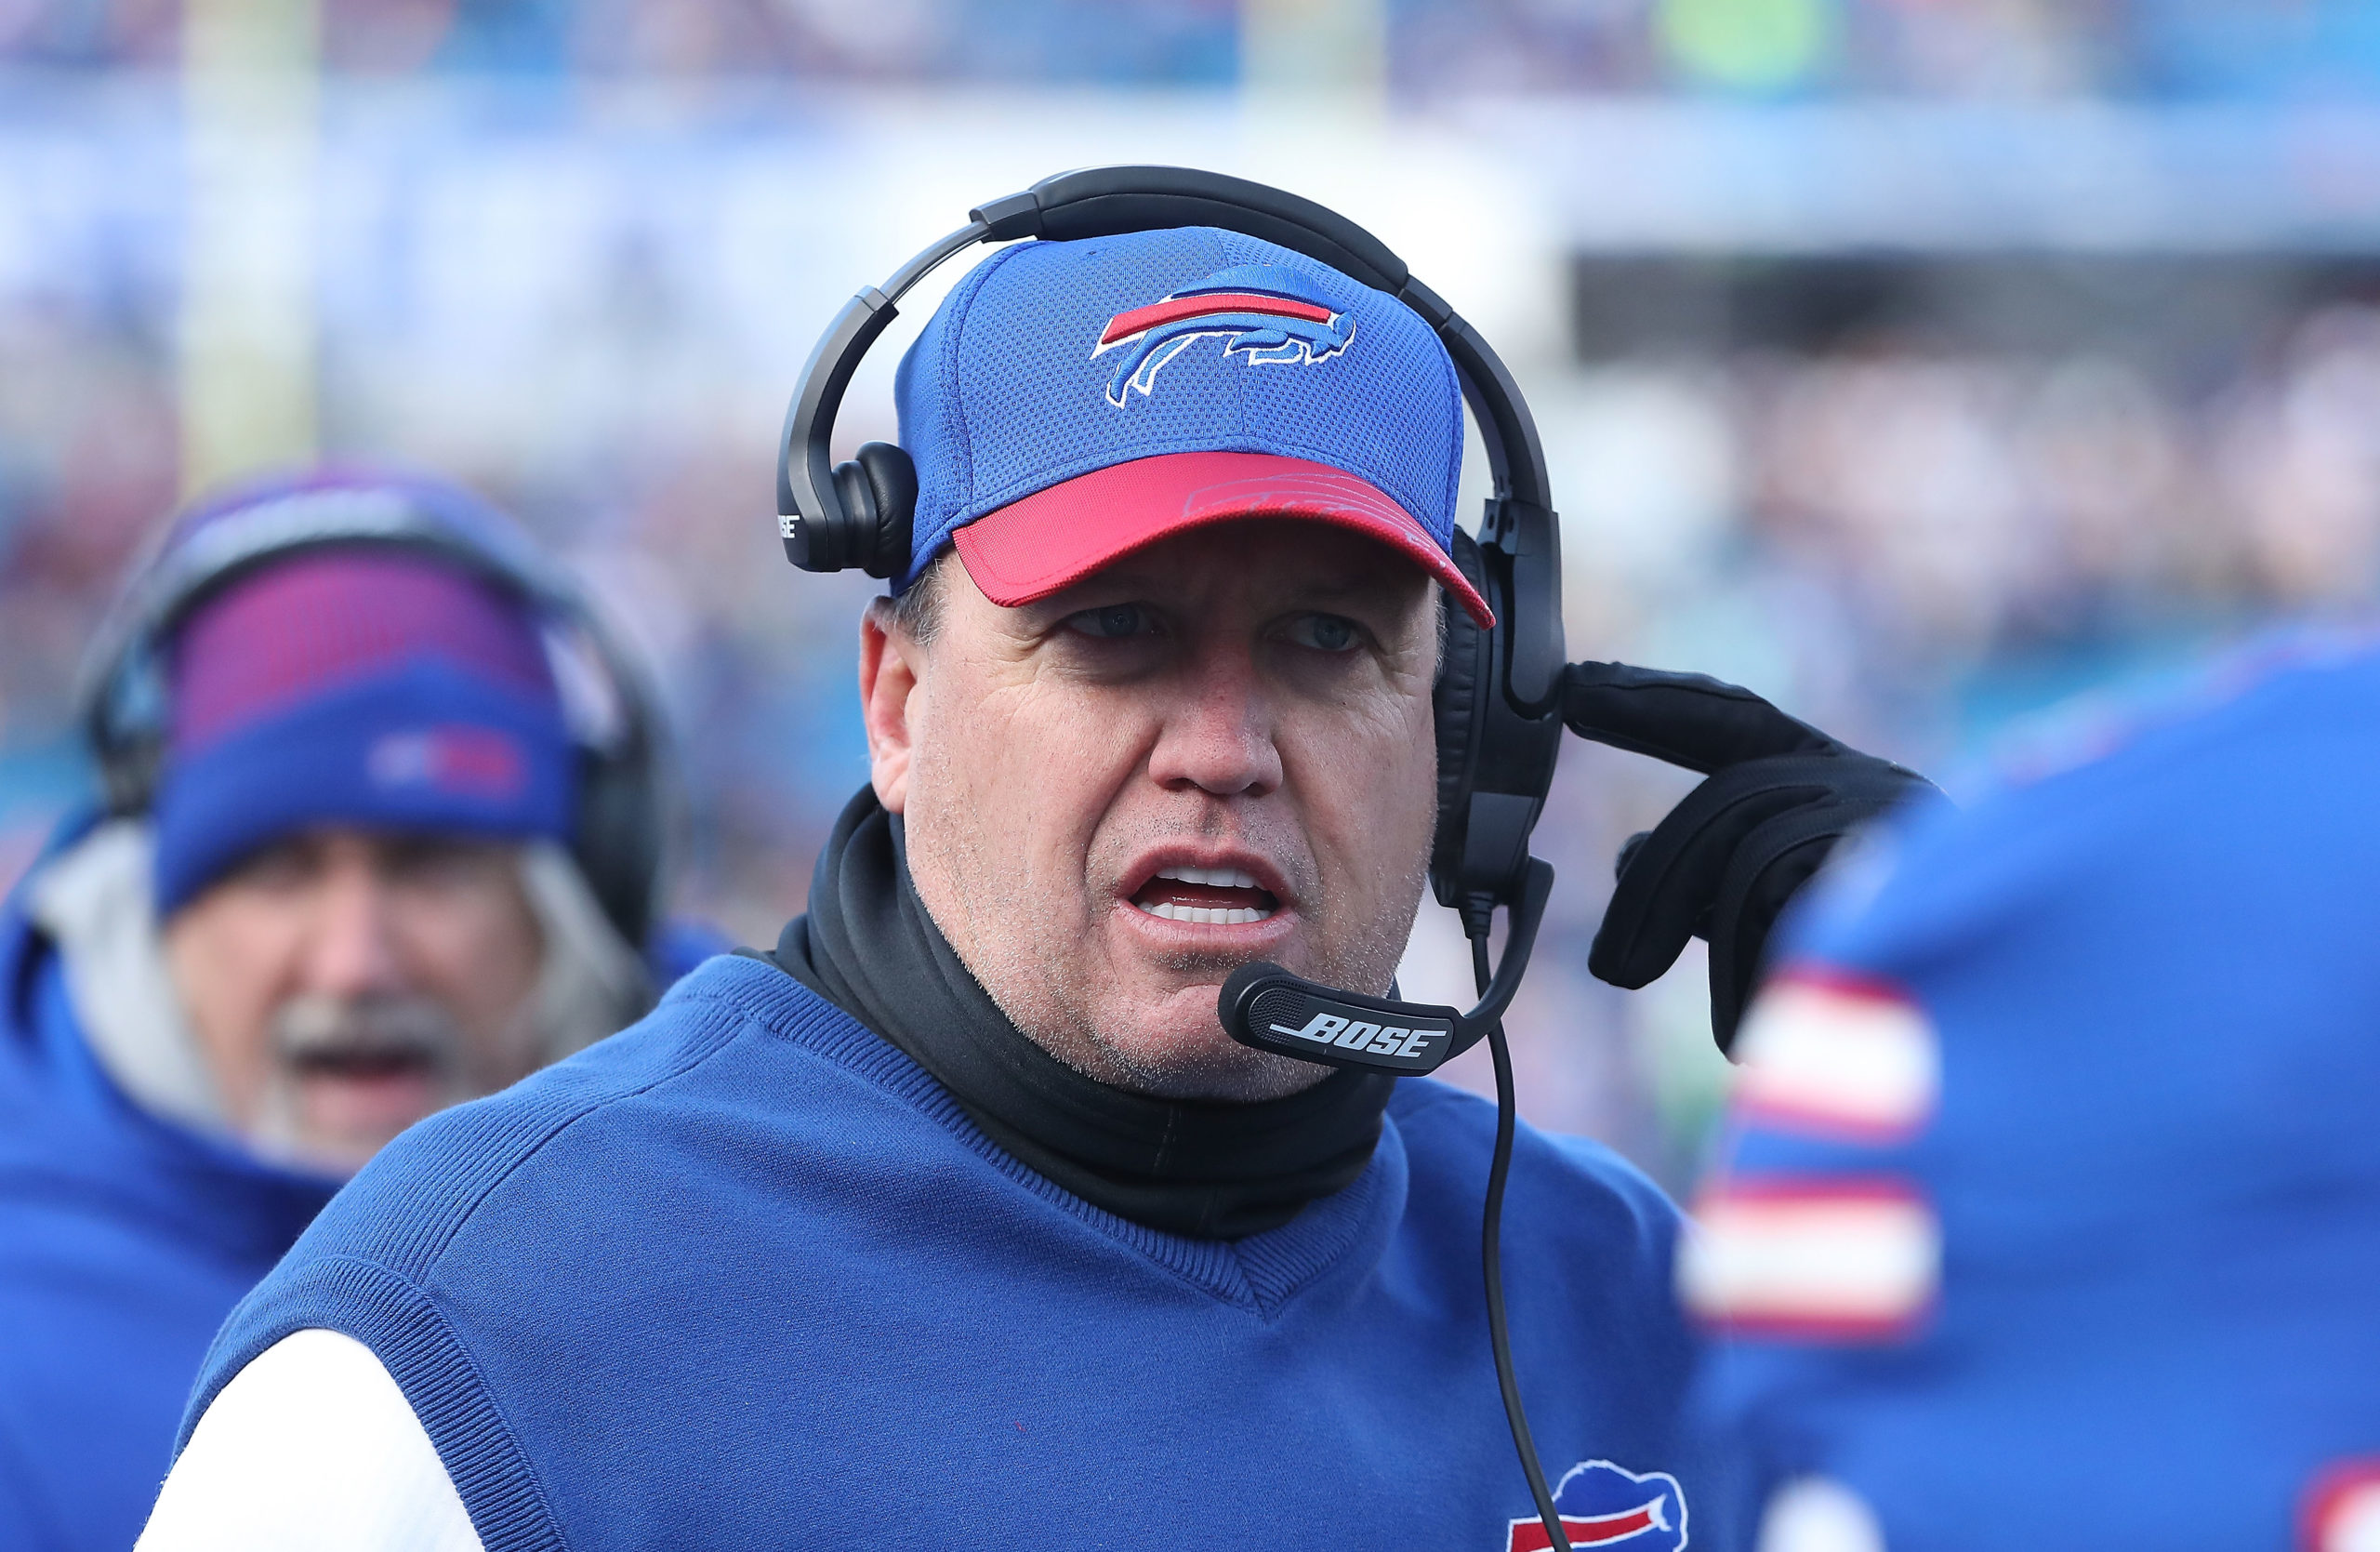 ORCHARD PARK, NY - DECEMBER 18: Head coach Rex Ryan of the Buffalo Bills works the sidelines against the Cleveland Browns during the first half at New Era Field on December 18, 2016 in Orchard Park, New York. Tom Szczerbowski/Getty Images